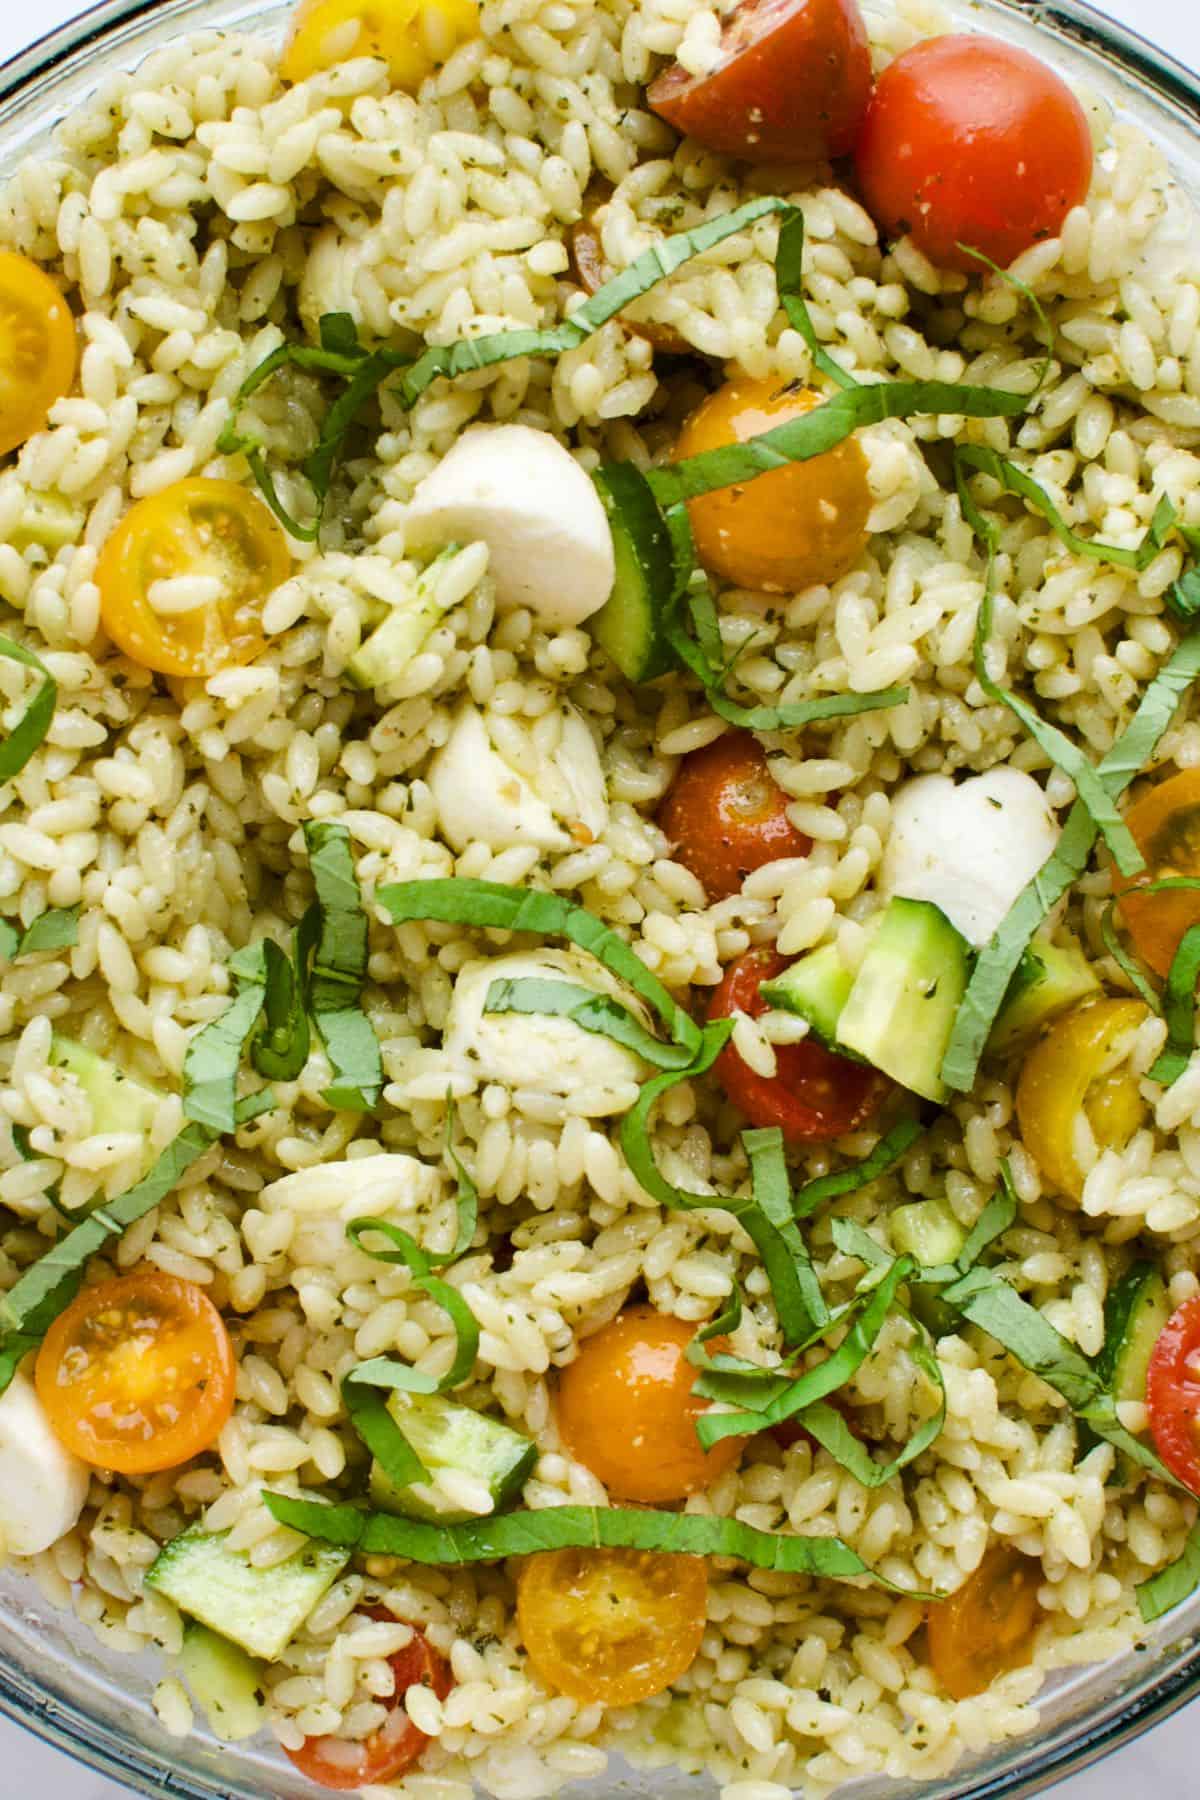 A close up view of orzo pesto pasta salad, with cherry tomatoes, cucumbers and basil.